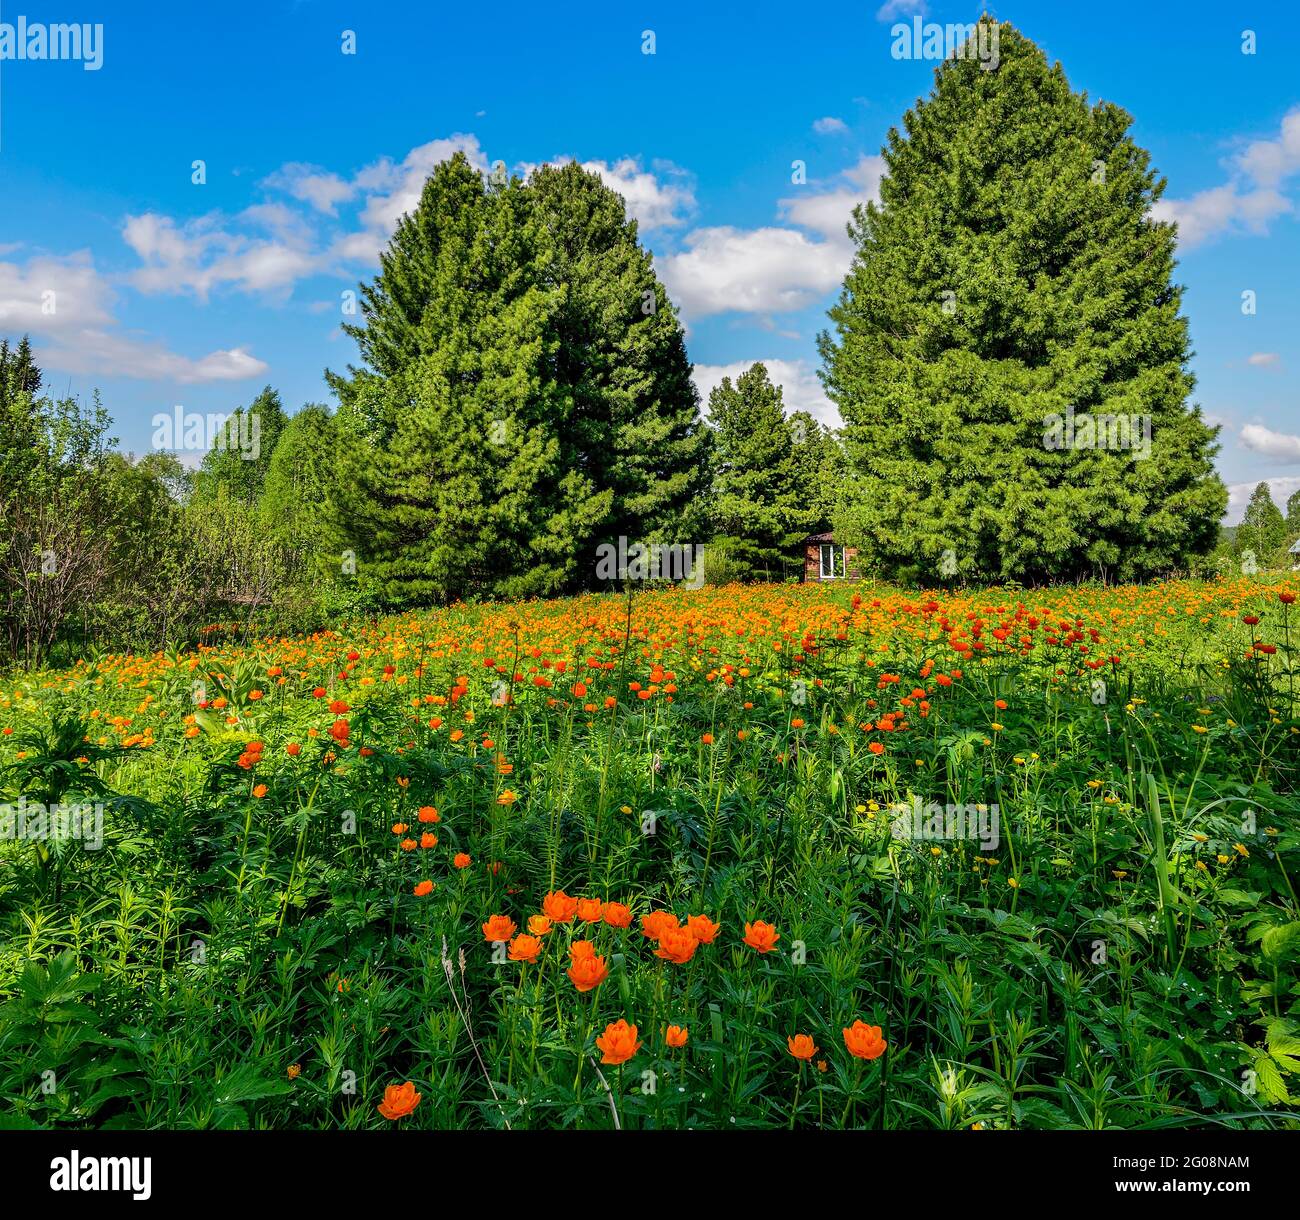 Large flowering meadow at the edge of coniferous forest. Small wooden house under huge cedars in background. Spring idyllic landscape with orange Glob Stock Photo